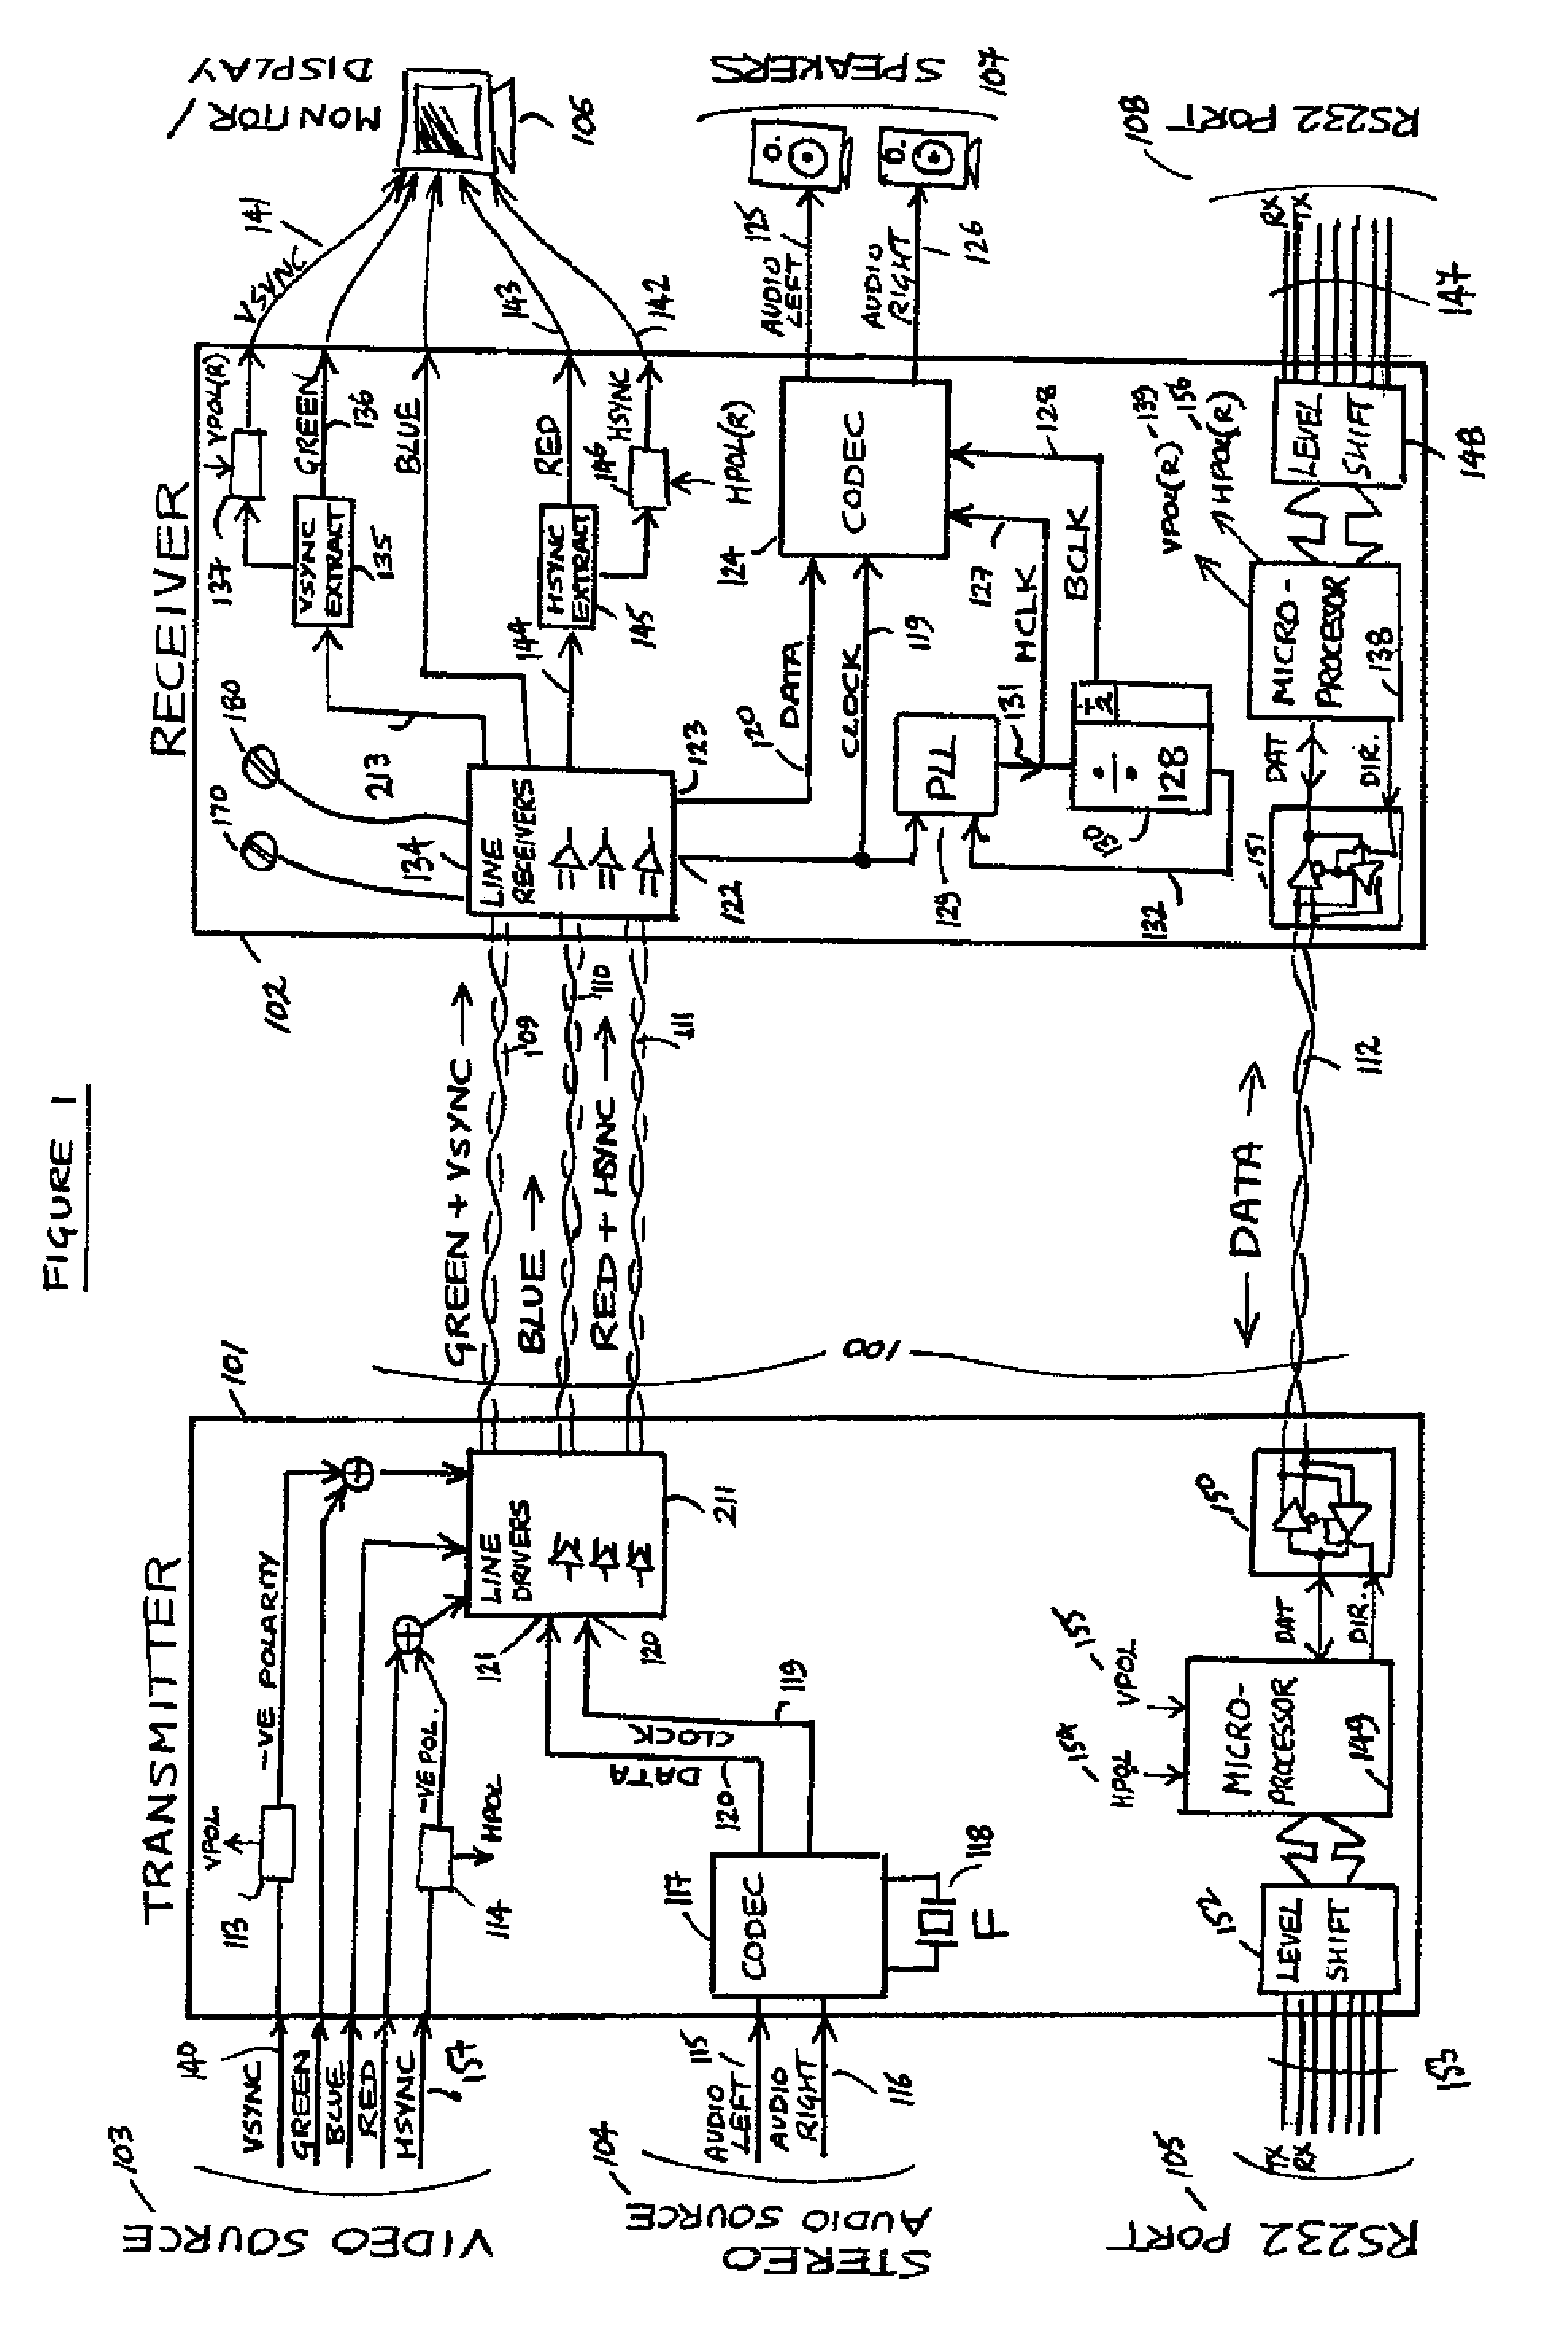 Method and apparatus for transmitting audio and video signal via three twisted pairs of conductors